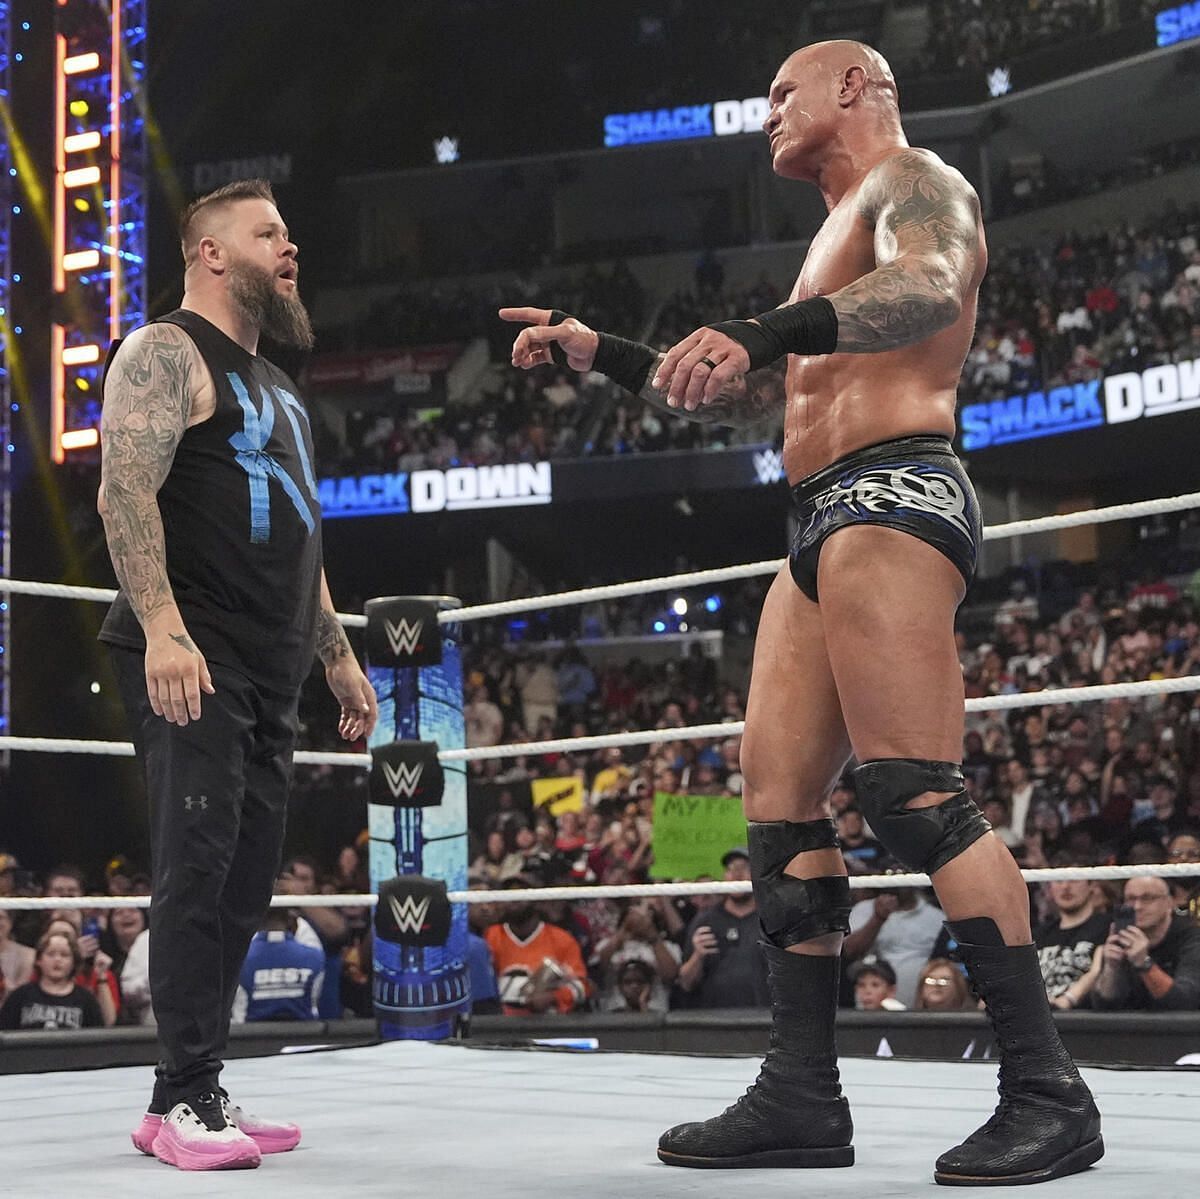 Owens and Orton can get angry very easily